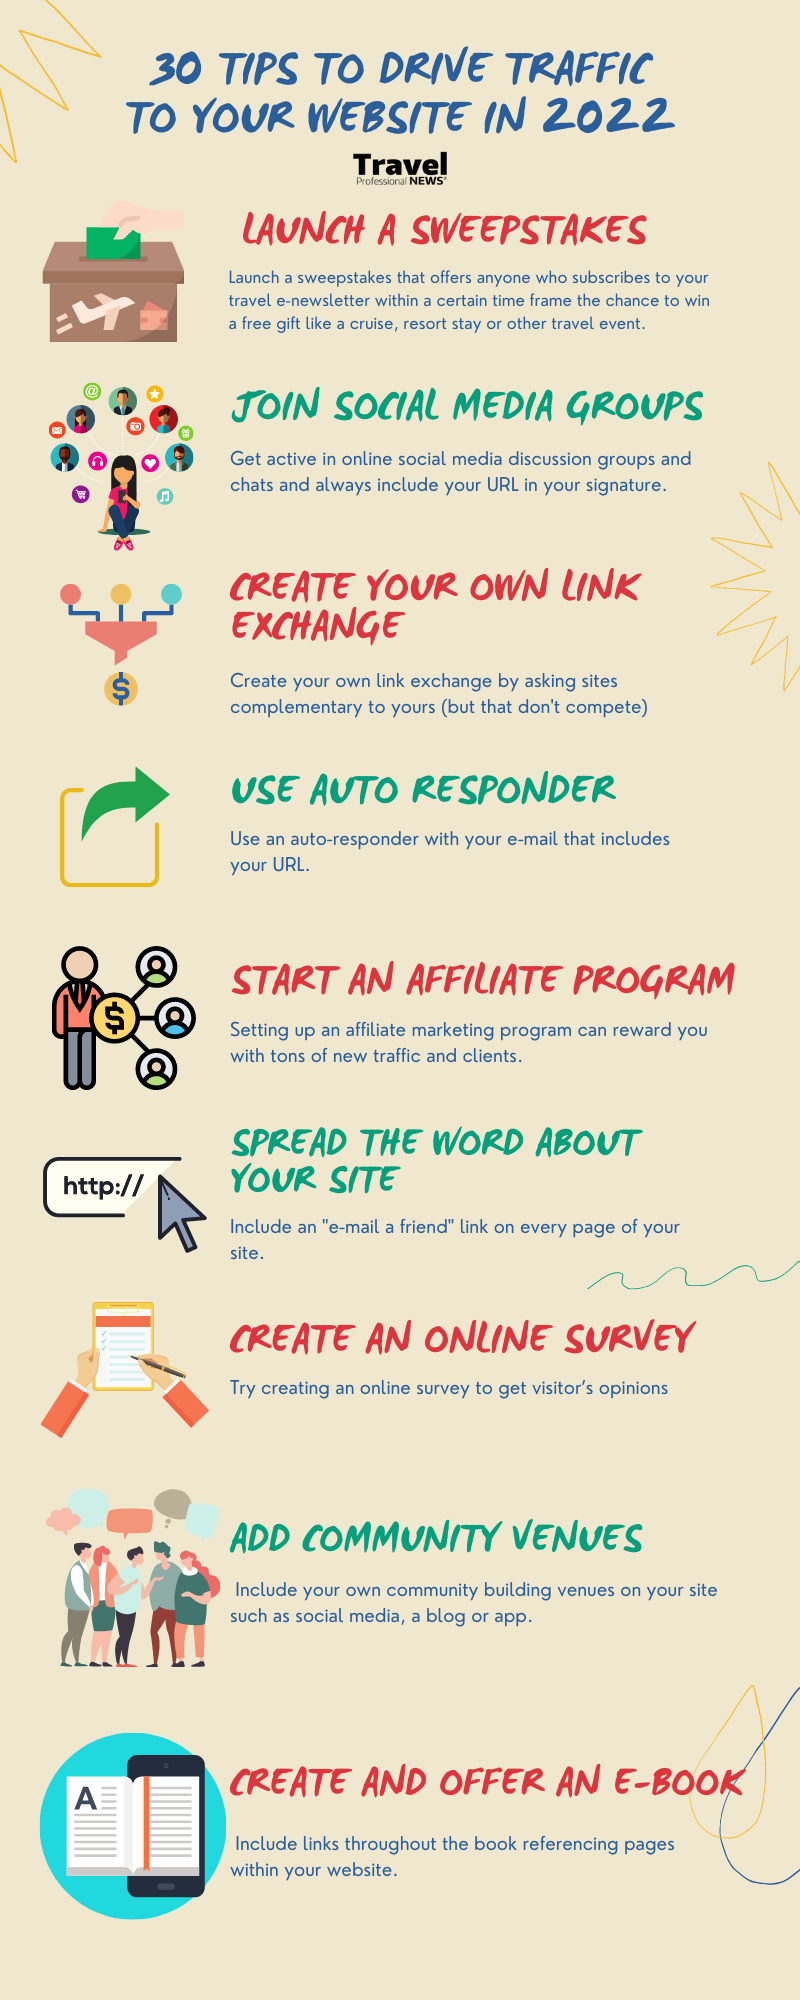 30-Tips-to-Drive-Traffic-to-Your-Website-in-2022-Infographic-2-TPN